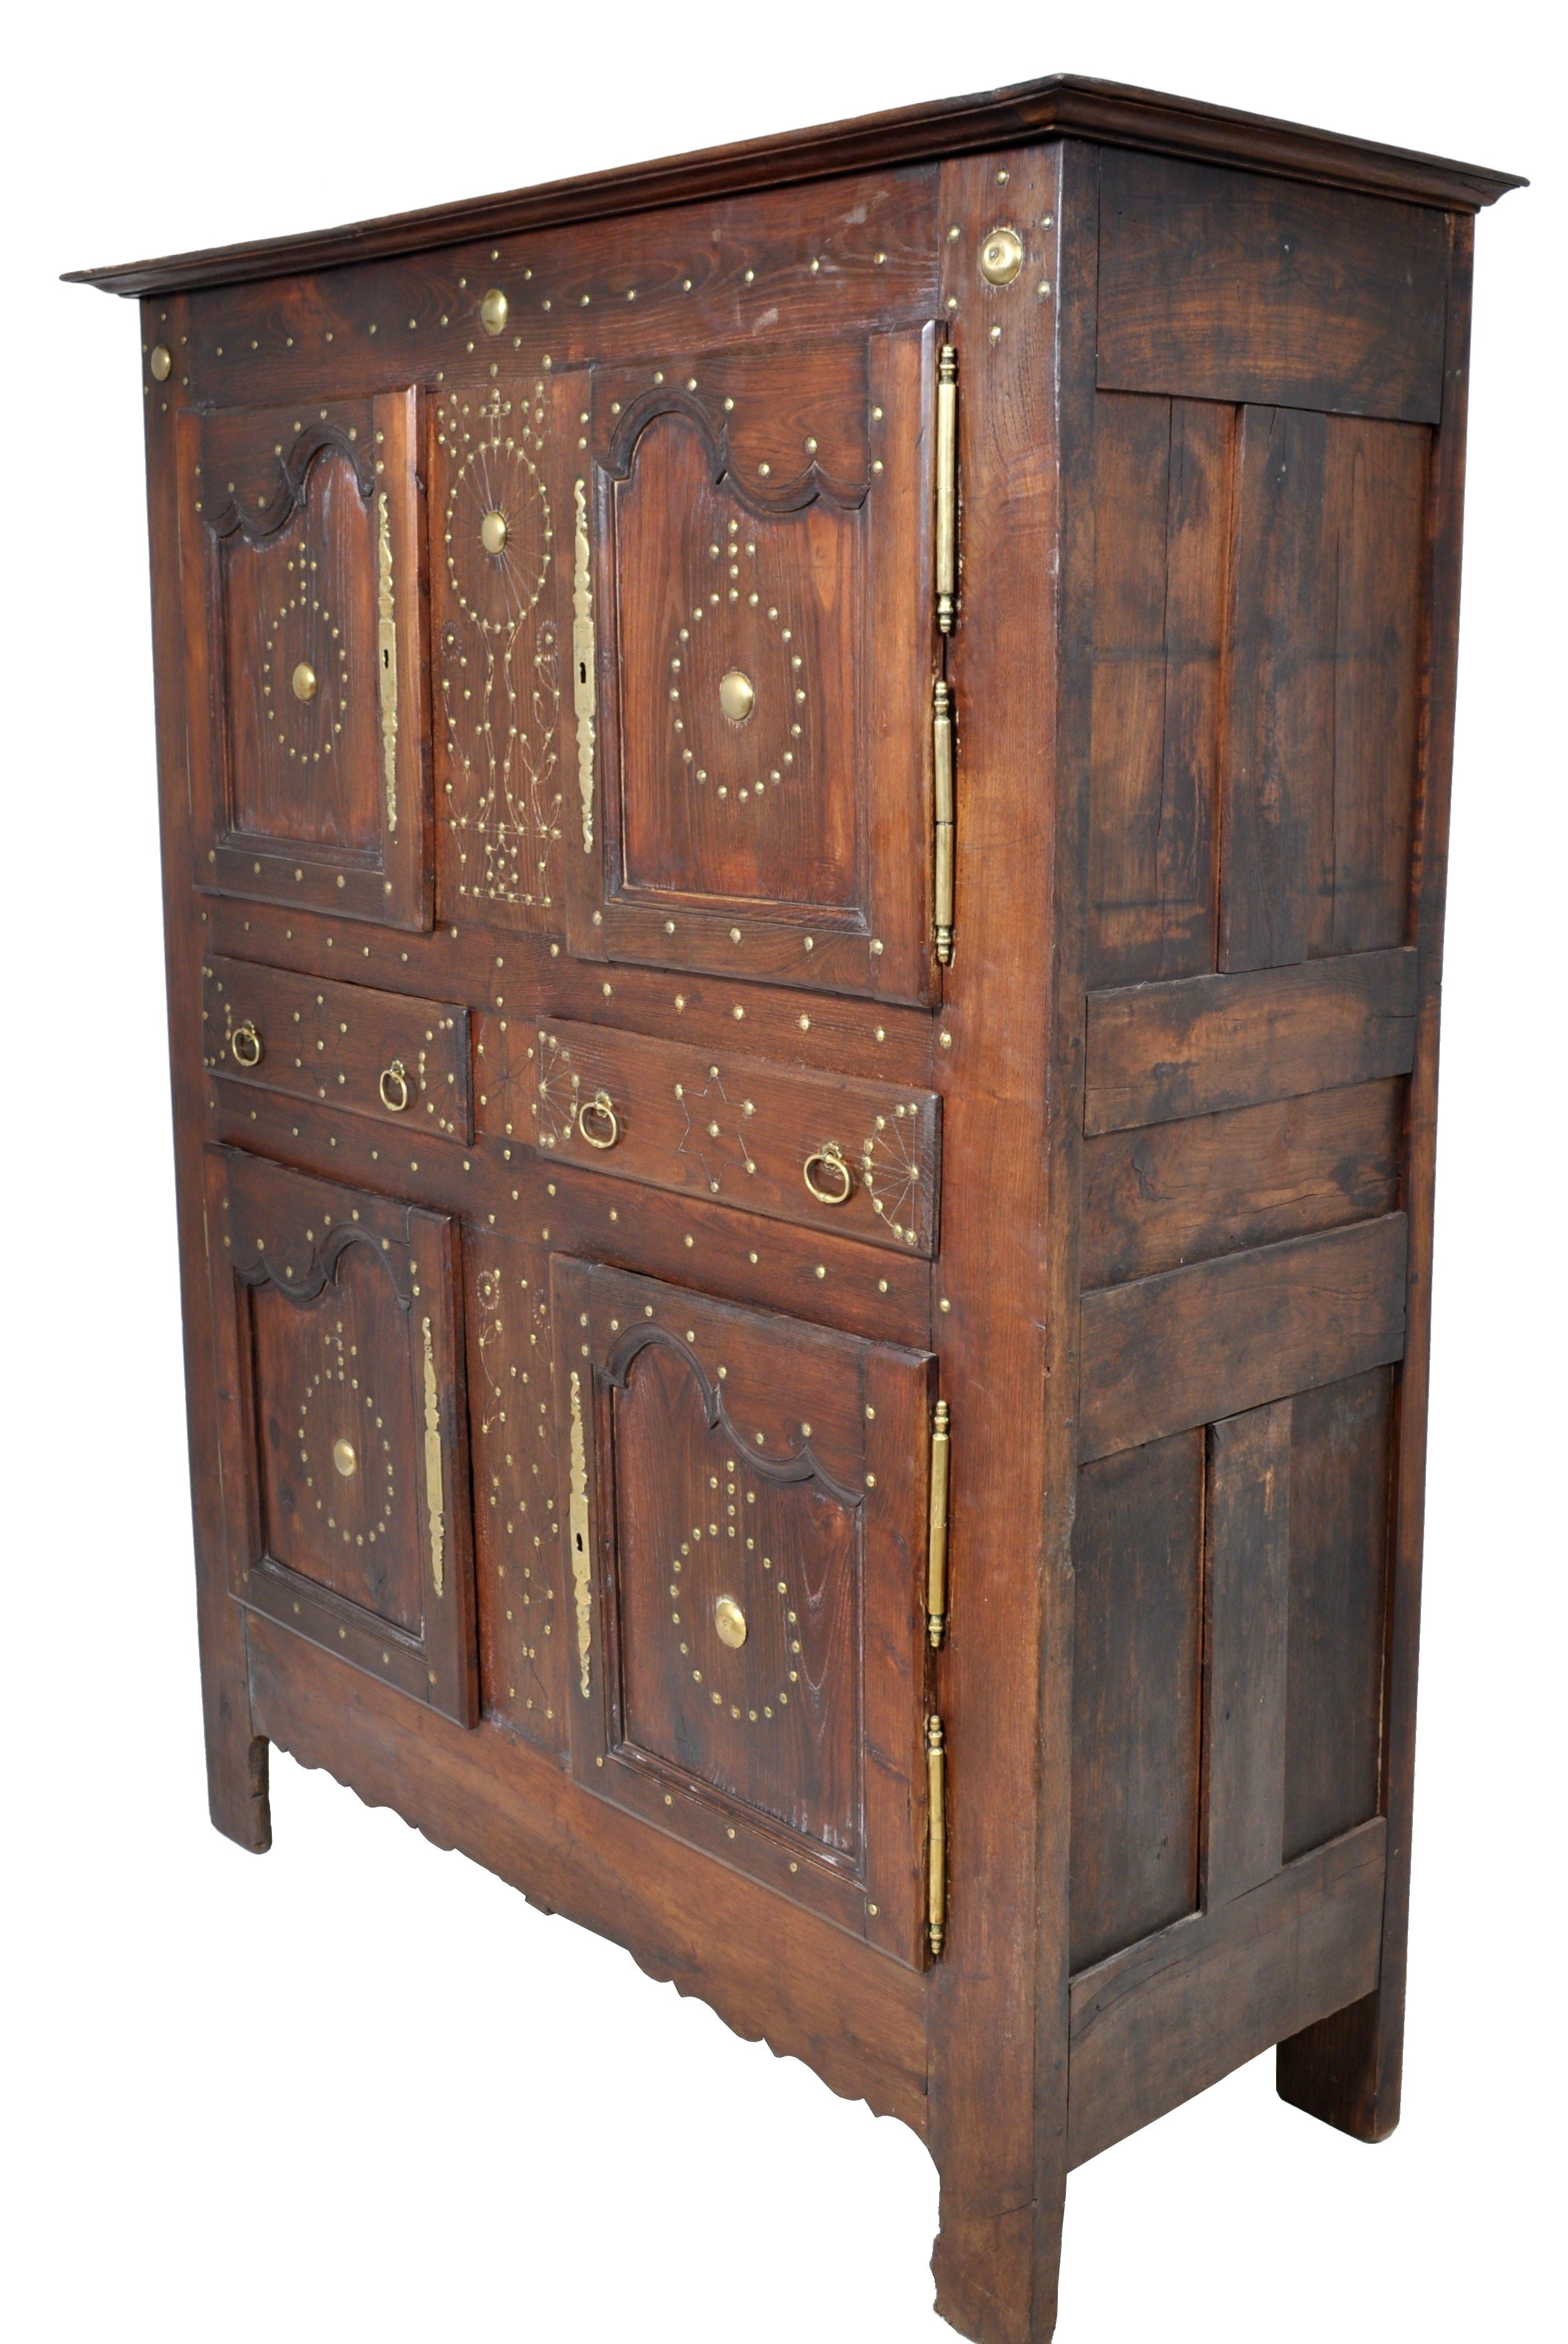 A most unusual 18th century French, Brittany, Provincial chestnut cabinet, circa 1720. The cabinet with original brass stud-work decoration. Twin cupboards over twin cupboards, each having a shaped paneled door with long engraved brass escutcheons,